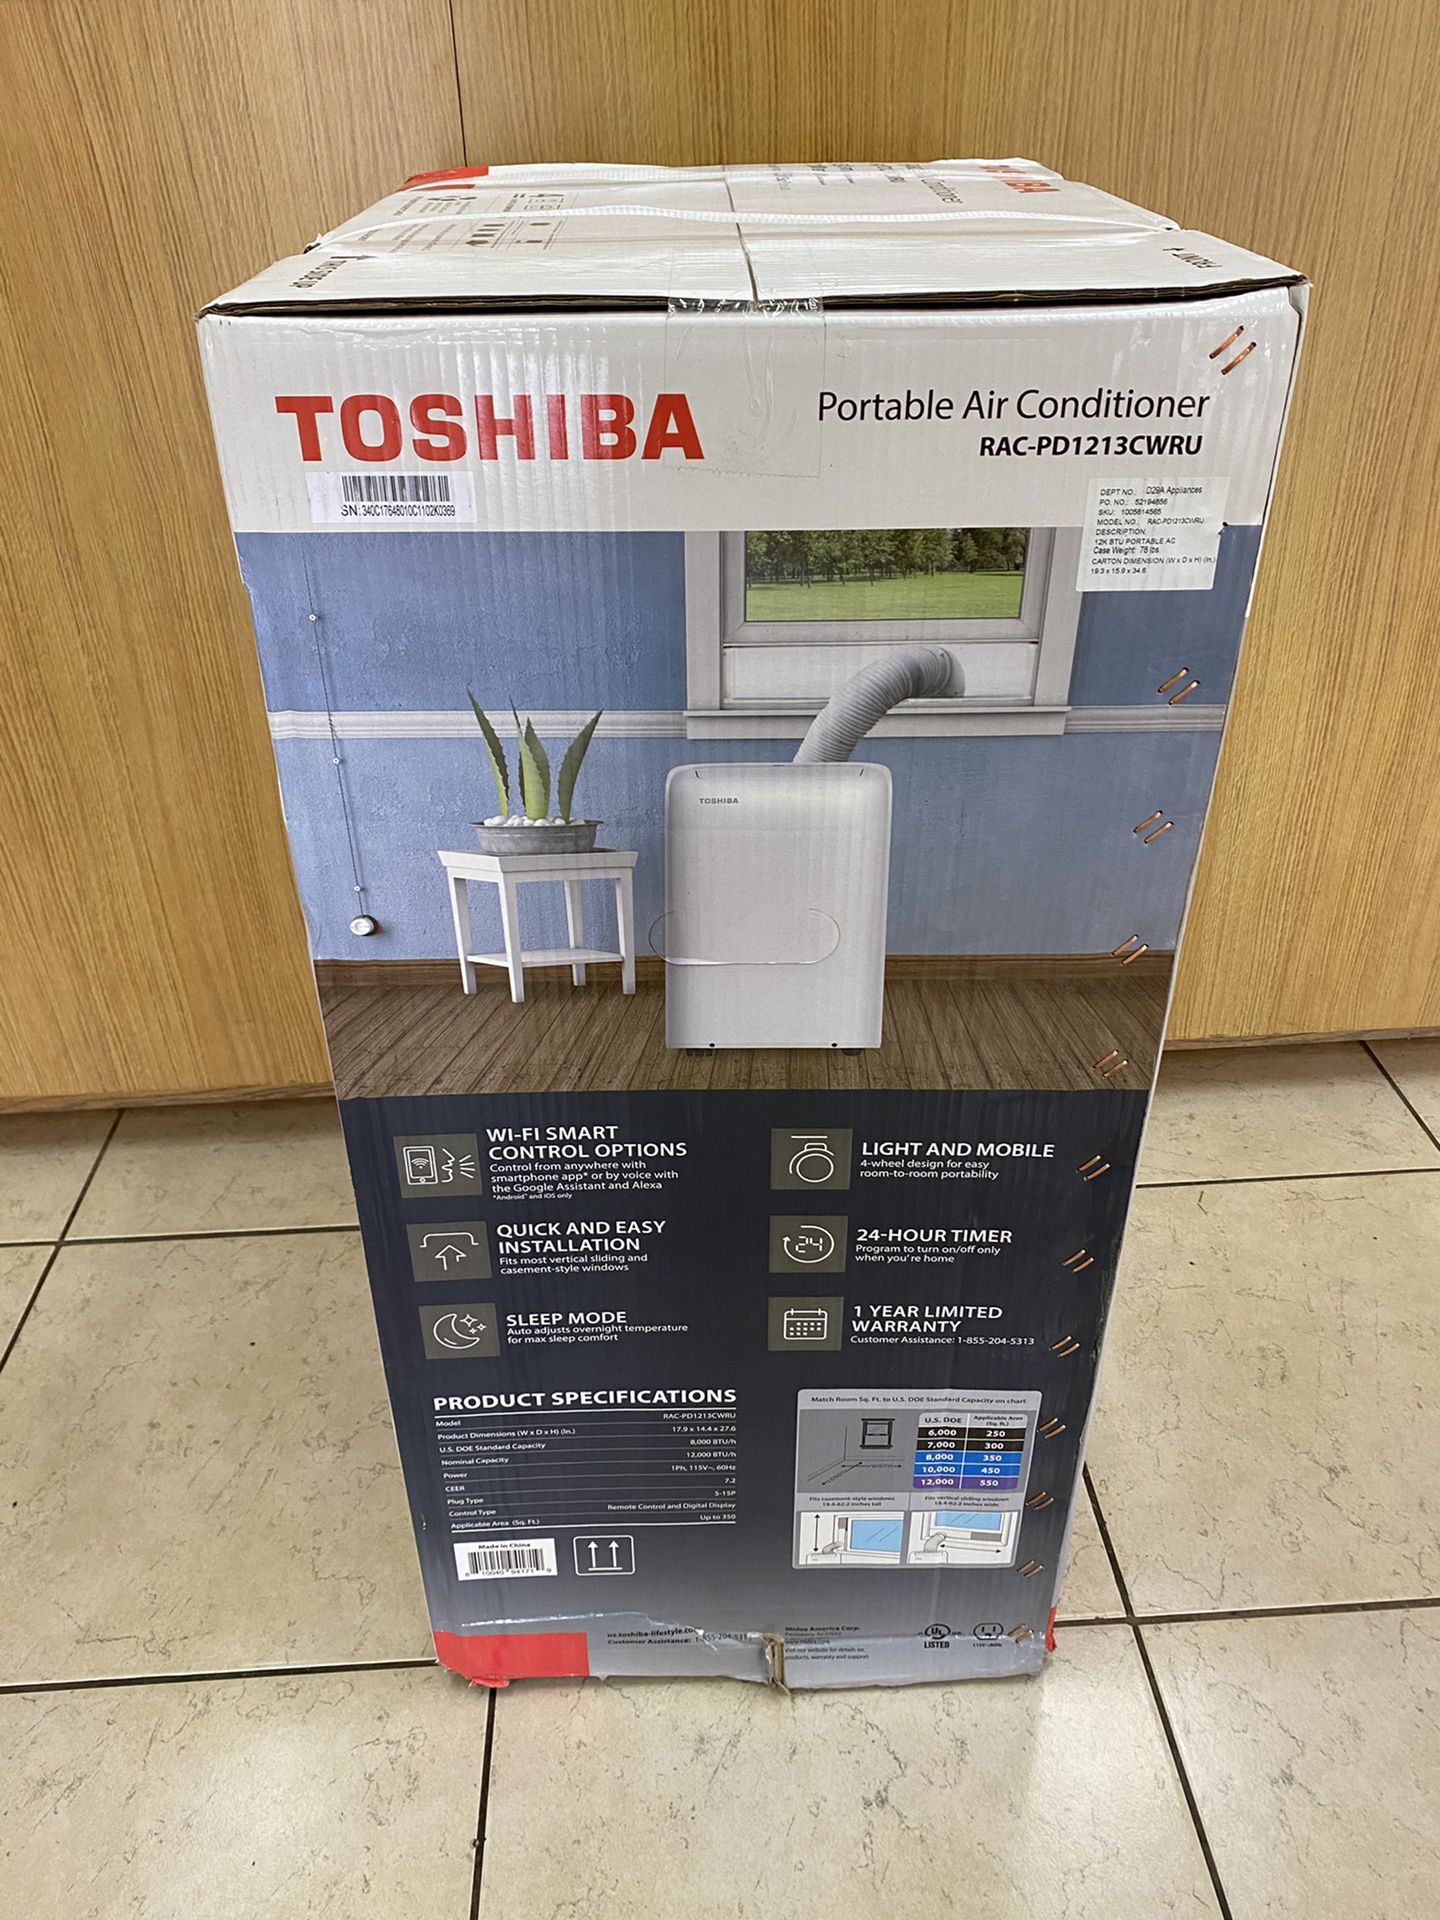 Toshiba RICE Cooker Made In Japan (Honatsukama Series) for Sale in City Of  Industry, CA - OfferUp